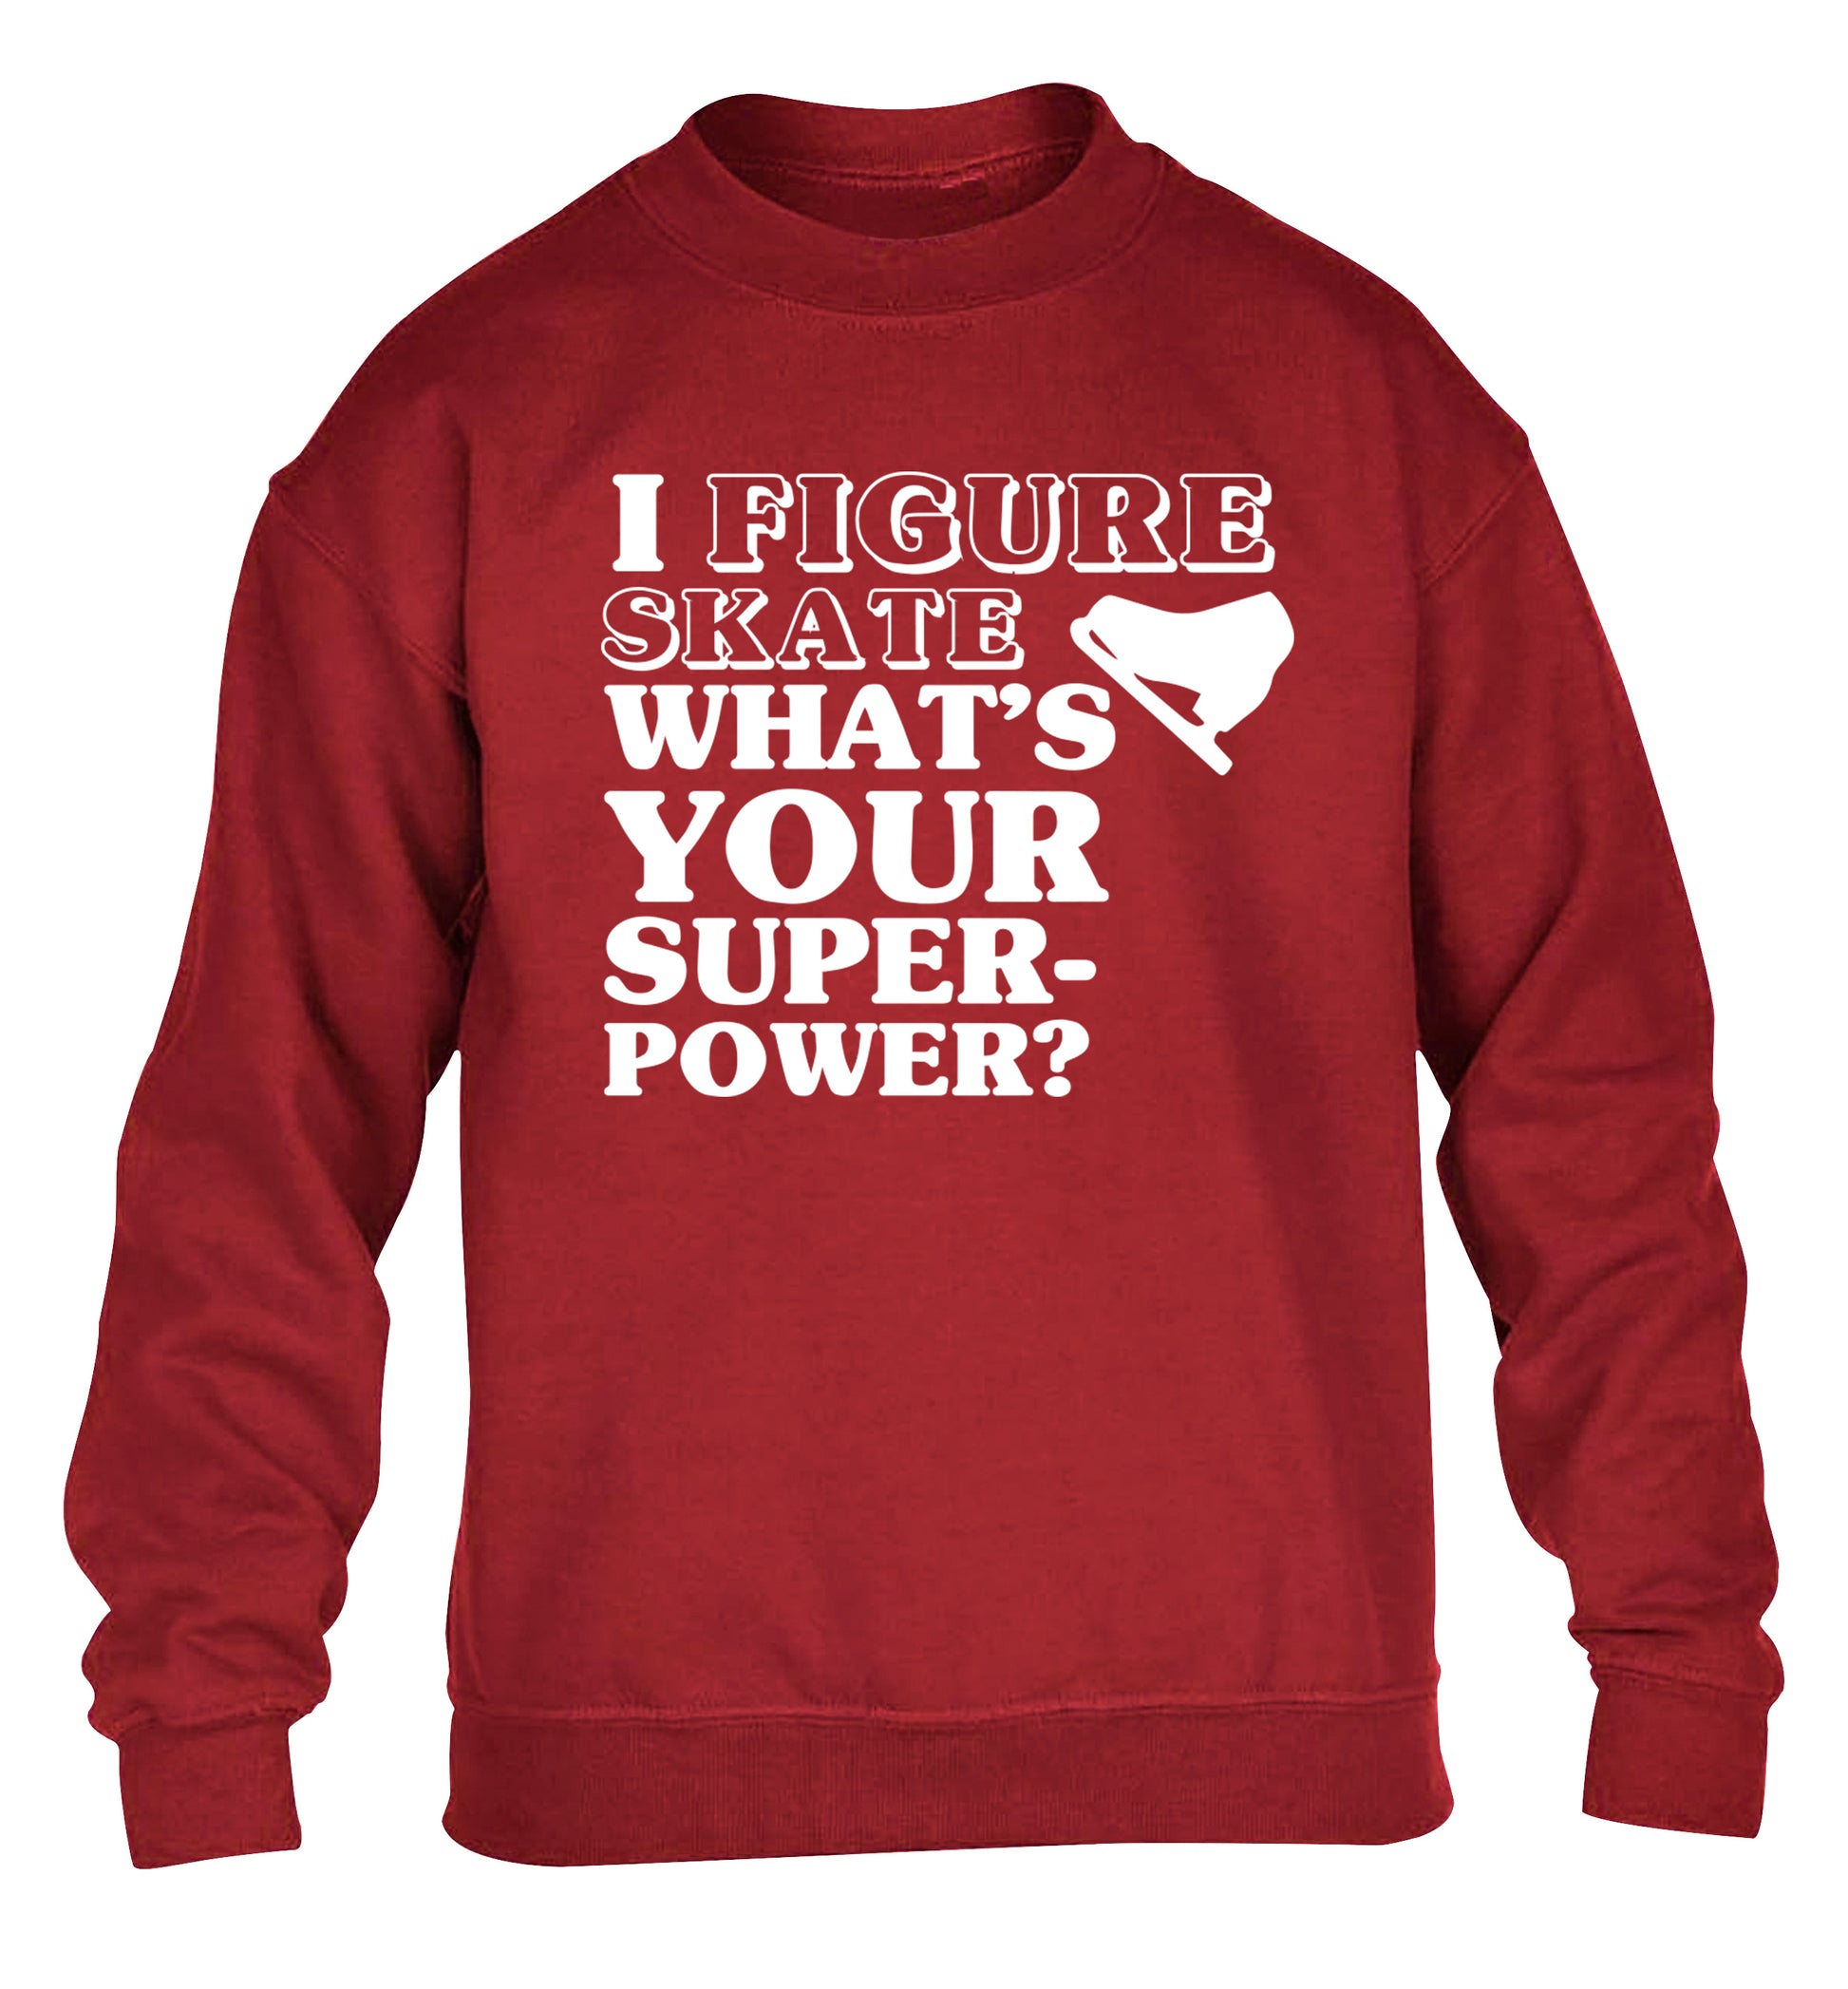 I figure skate what's your superpower? children's grey sweater 12-14 Years